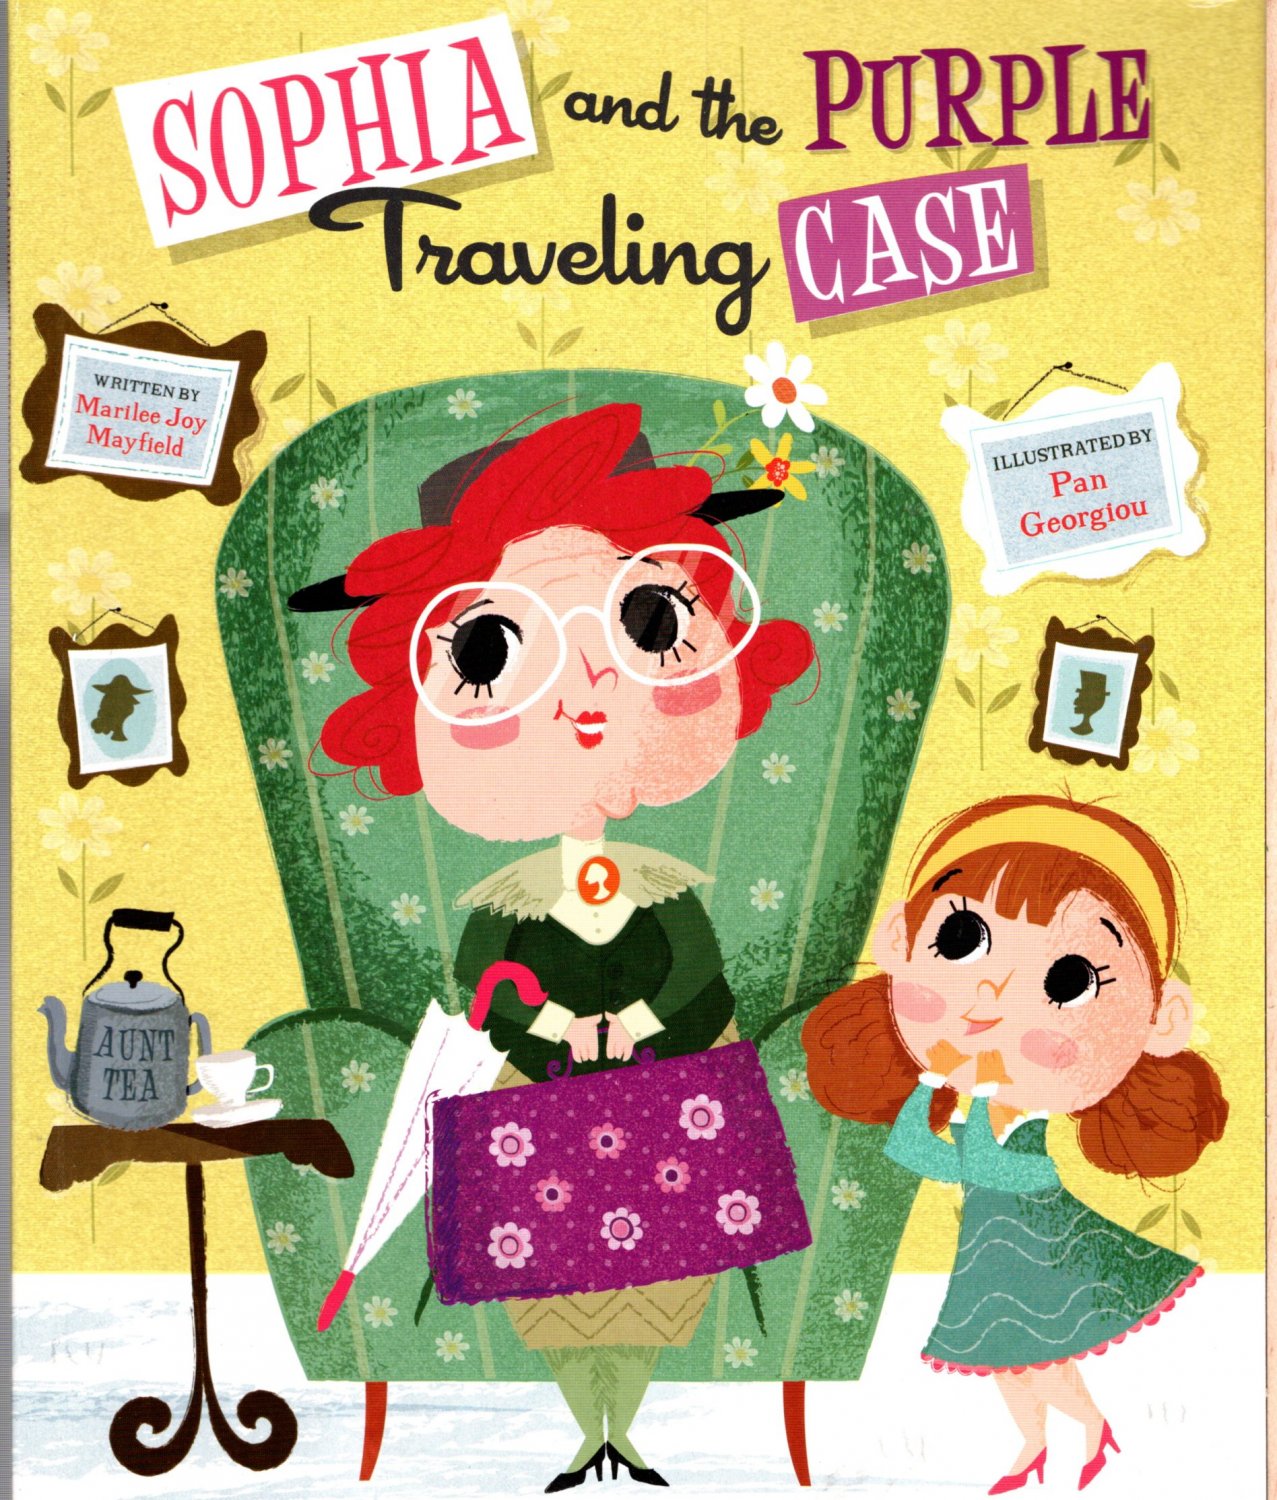 Sophia and the Purple Traveling Case - A Story with Moral Values - Children's Book